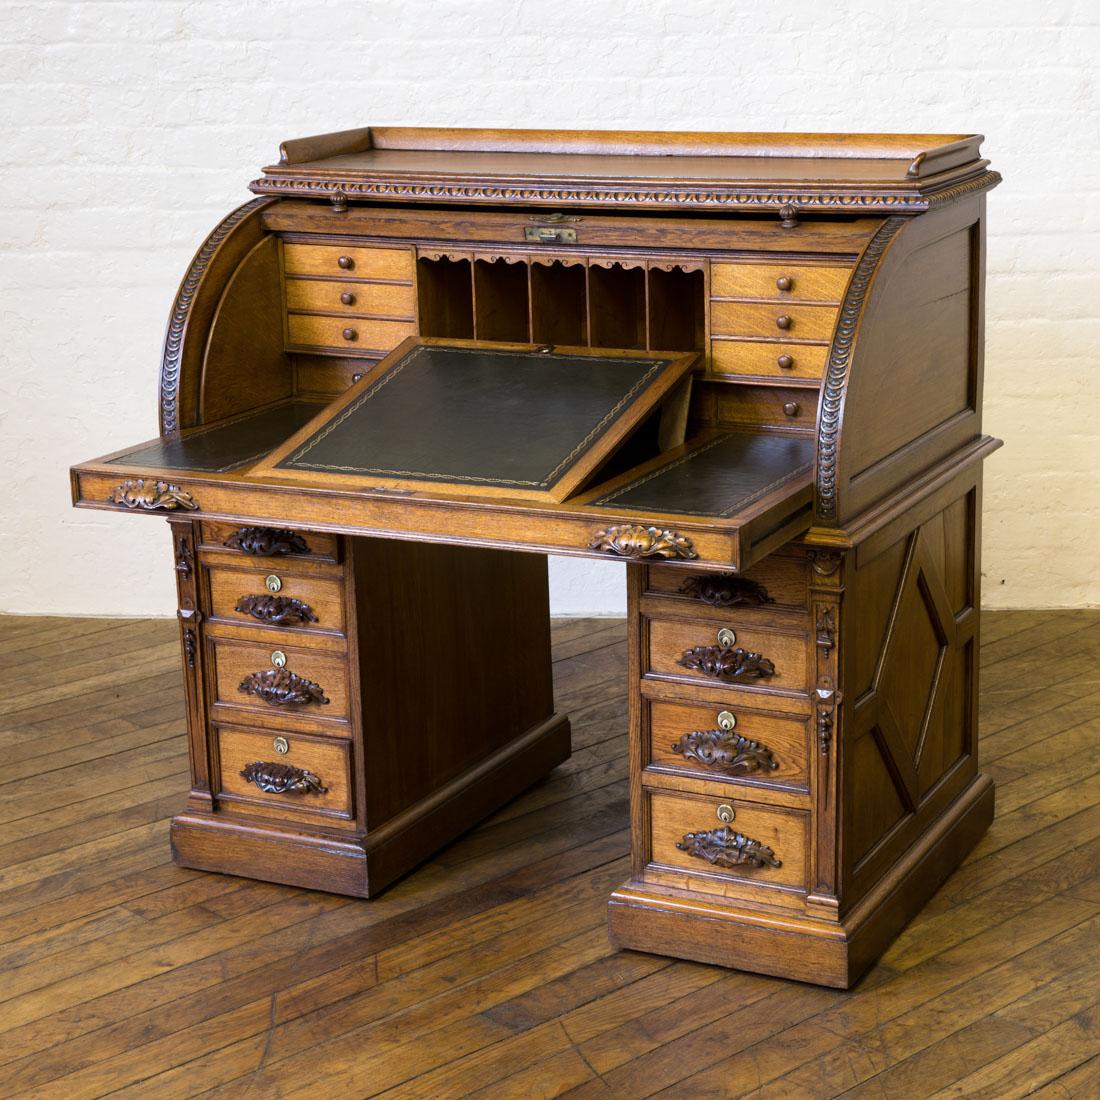 A stunning Victorian solid oak cylinder desk of outstanding workmanship and design. The galleried top gives way to a finely carved cylinder front, that reveals a well fitted interior with a newly leathered writing surface of which the central